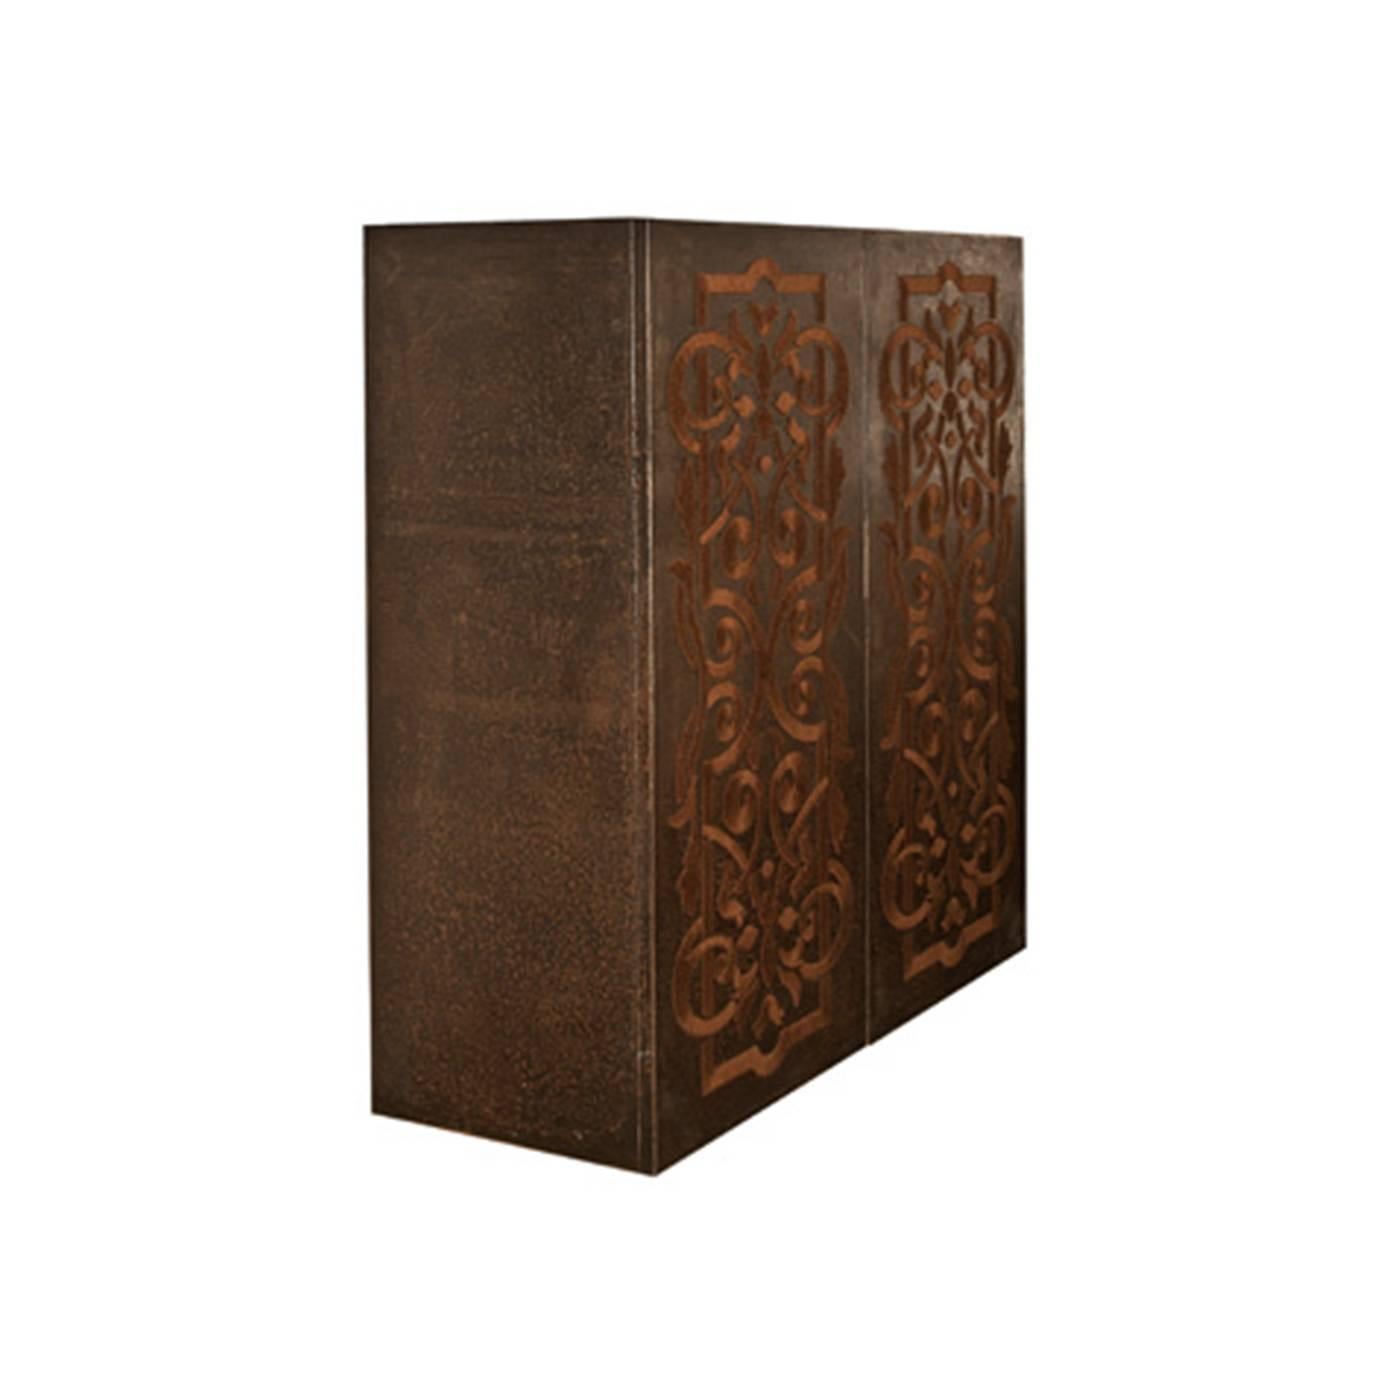 This extraordinary two-door cabinet features a Minimalist Silhouette, combined with a striking, one-of-a-kind decoration. This extraordinary two-door cabinet features a Minimalist Silhouette, combined with a striking, one-of-a-kind decoration. The